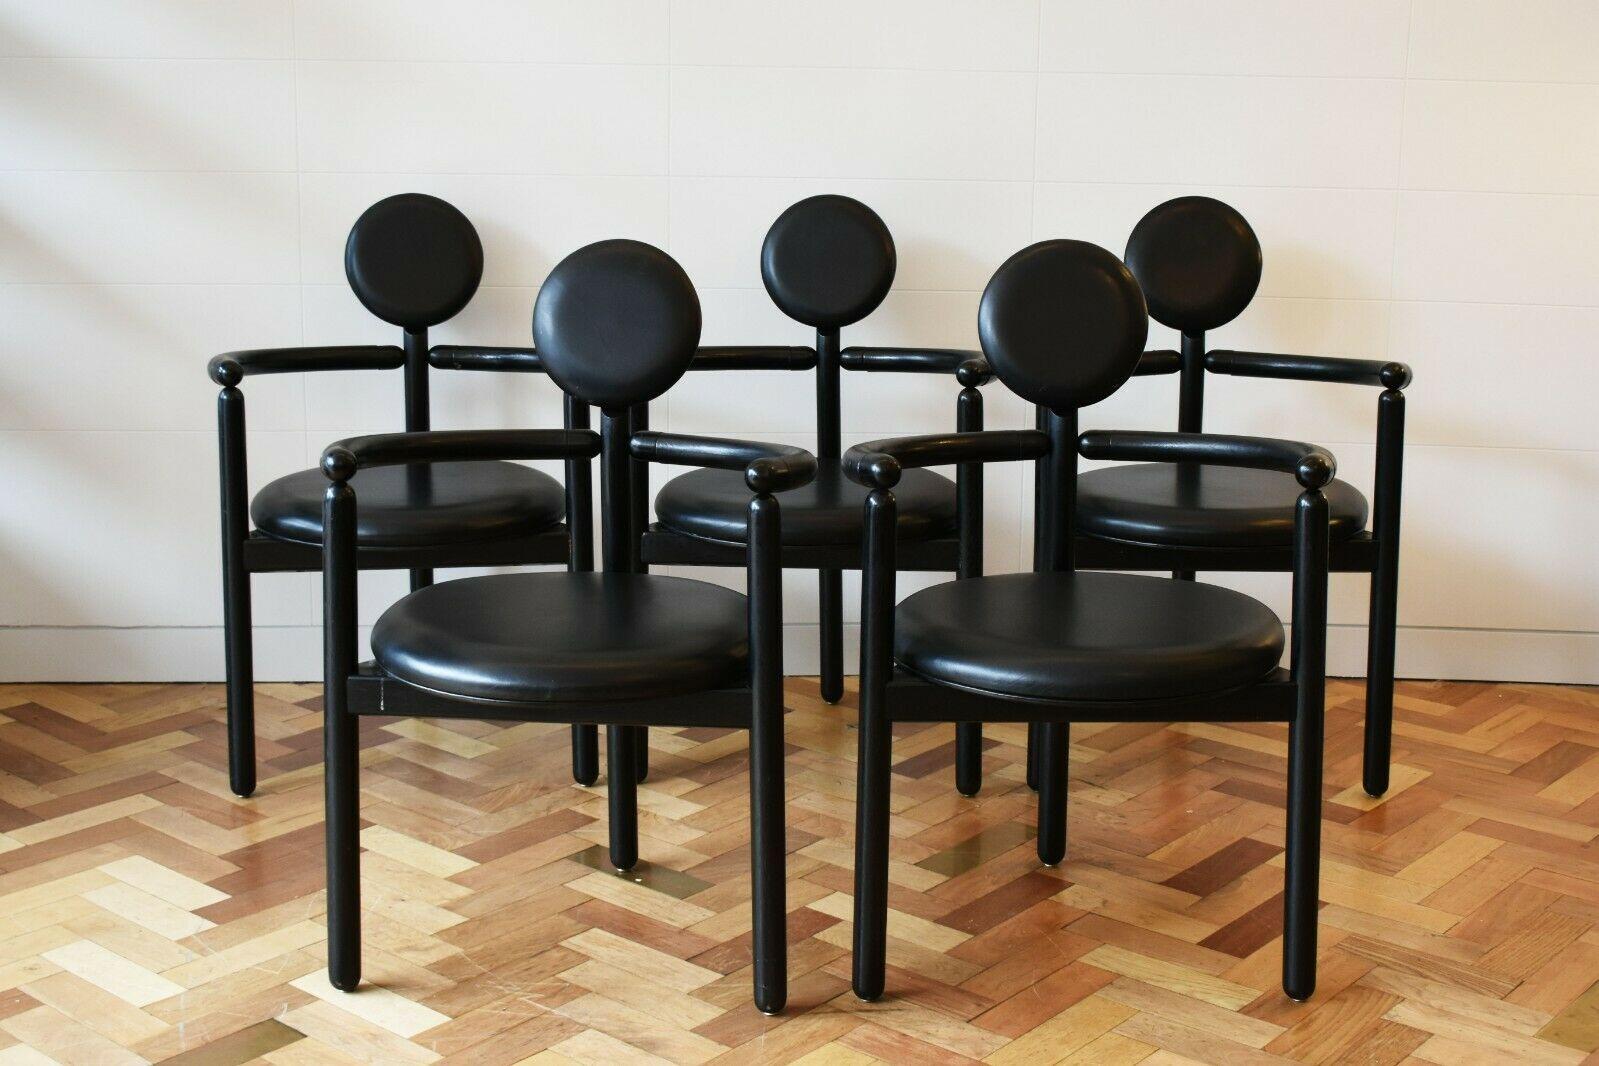 An extremely rare and super stylish dining set designed by Italian designer Vico Magistretti for Rosenthal Einrichtung, 1980's.

This set comprises of a dining table and 6 chairs, in black ash wood with black leather seat and back rests on the